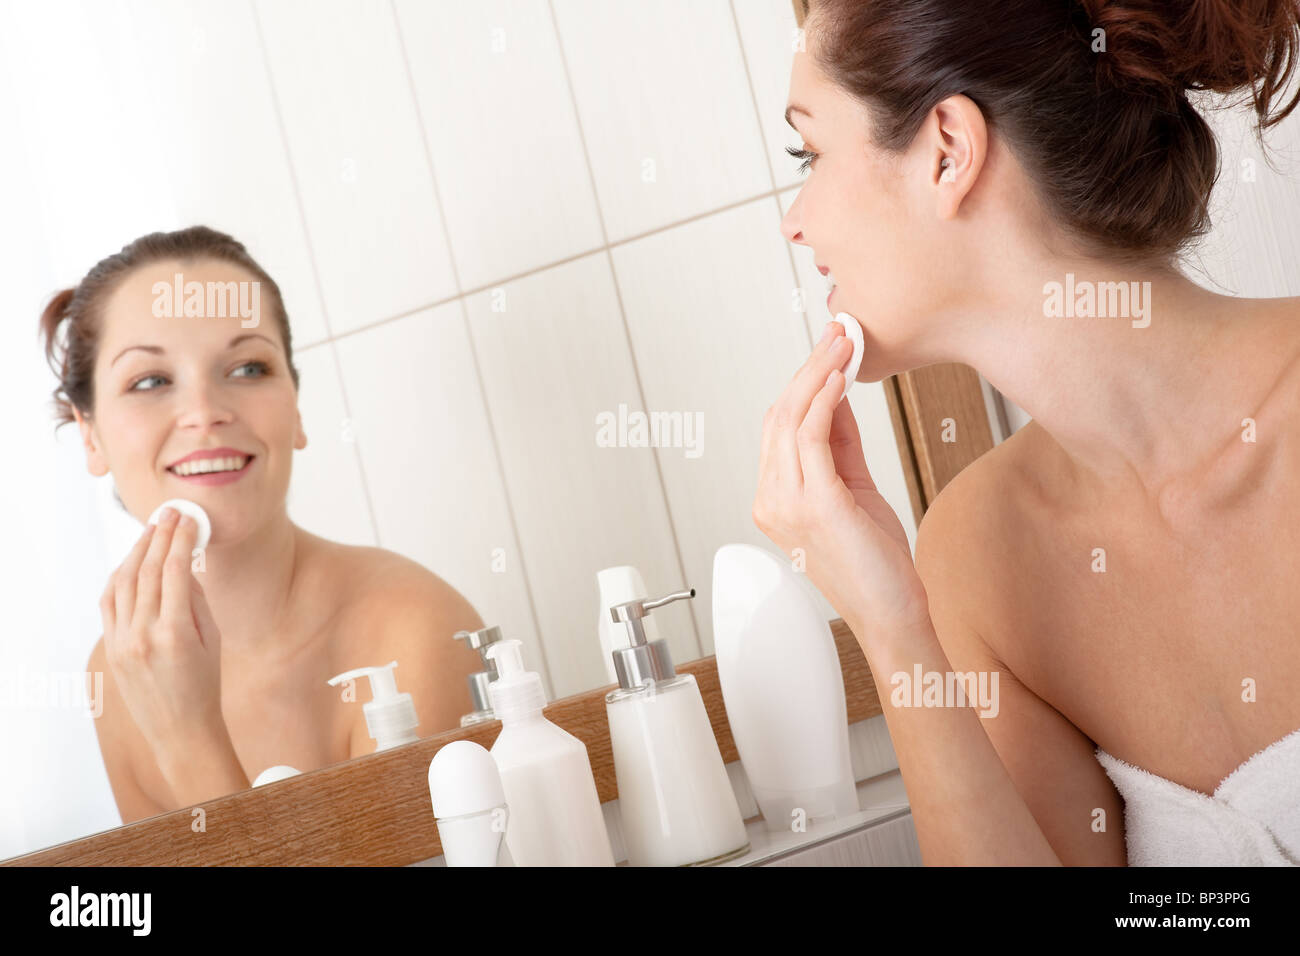 Young woman cleaning her face in the bathroom Stock Photo